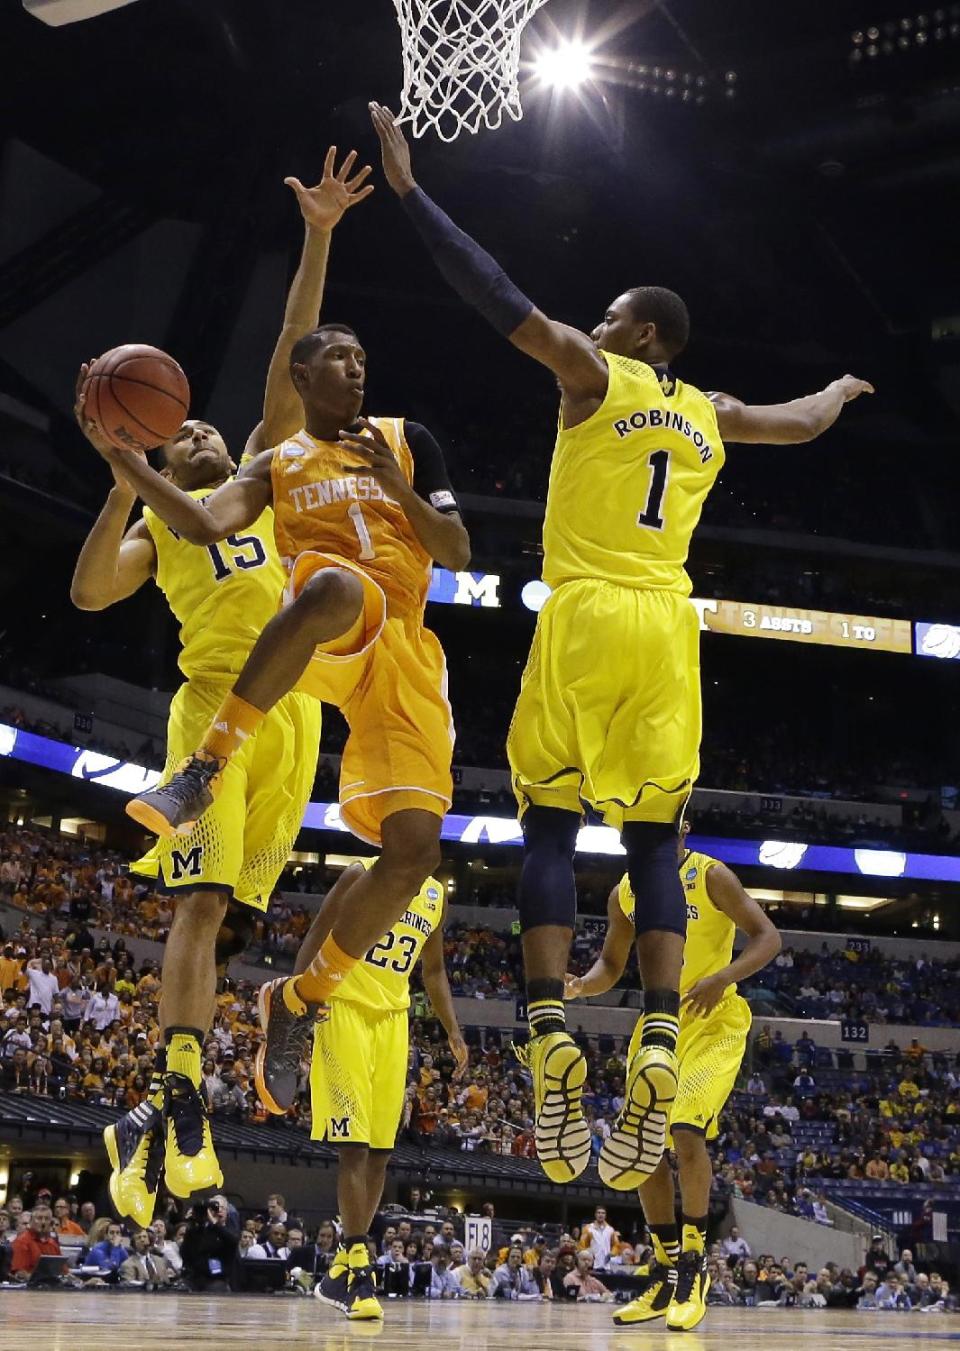 Tennessee's Josh Richardson passes around Michigan's Glenn Robinson III (1) and Jon Horford (15) during the first half of an NCAA Midwest Regional semifinal college basketball tournament game Friday, March 28, 2014, in Indianapolis. (AP Photo/Michael Conroy)